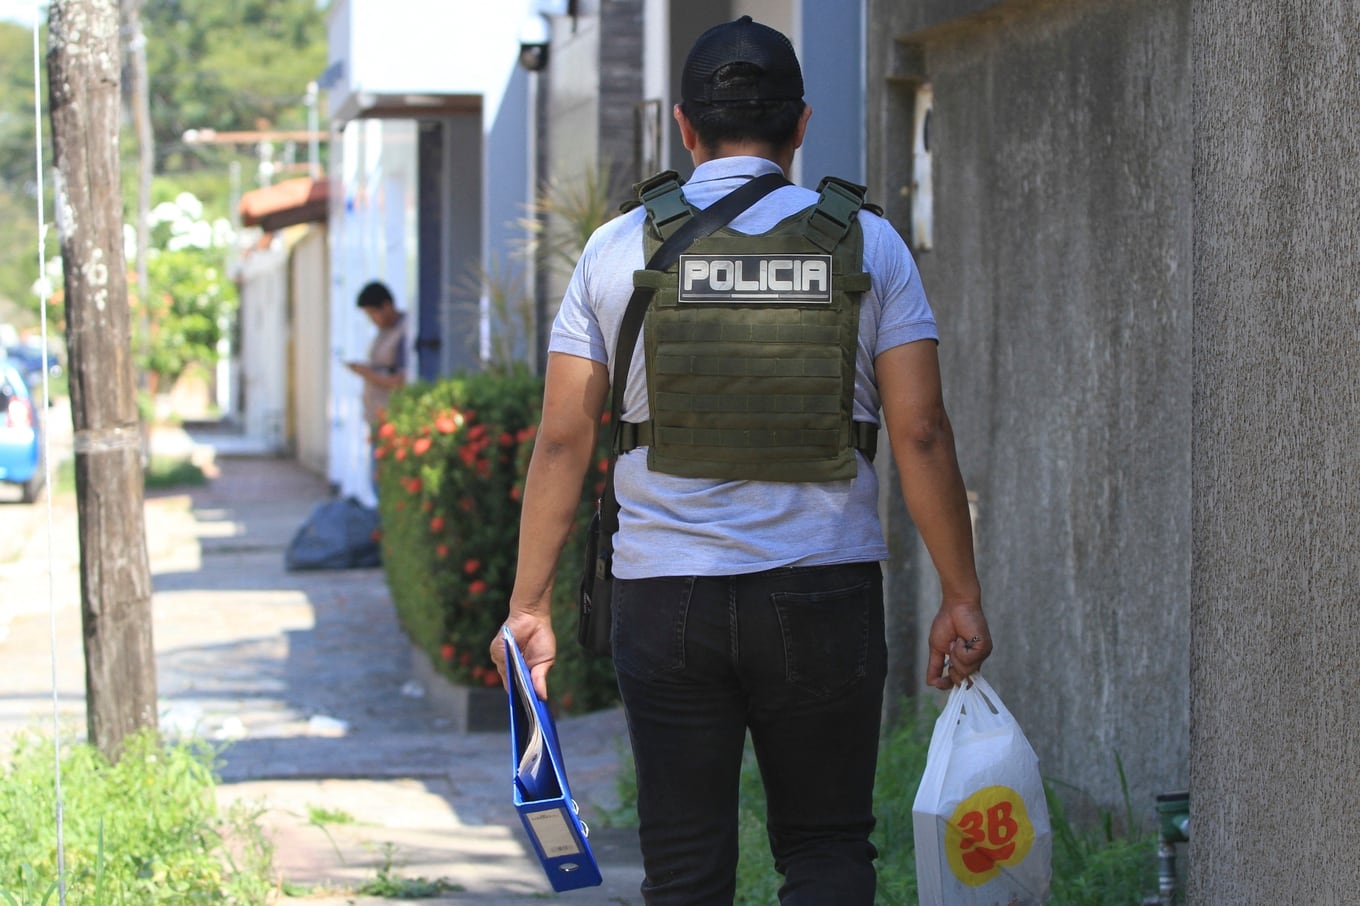 Anti-narcotics police officers carry out a raid on a house during an operation to try to arrest Uruguayan Sebastian Marset in Santa Cruz, Bolivia, on July 30, 2023. Bolivia has mobilized more than 2,250 security agents for a manhunt of a wanted cocaine trafficker who has ricocheted around the world to elude capture, a senior official said on Sunday. The target of the hunt is Sebastian Enrique Marset Cabrera, wanted on drugs charges in his native Uruguay, Paraguay, Brazil and the United States. (Photo by Ricardo MONTERO / AFP)